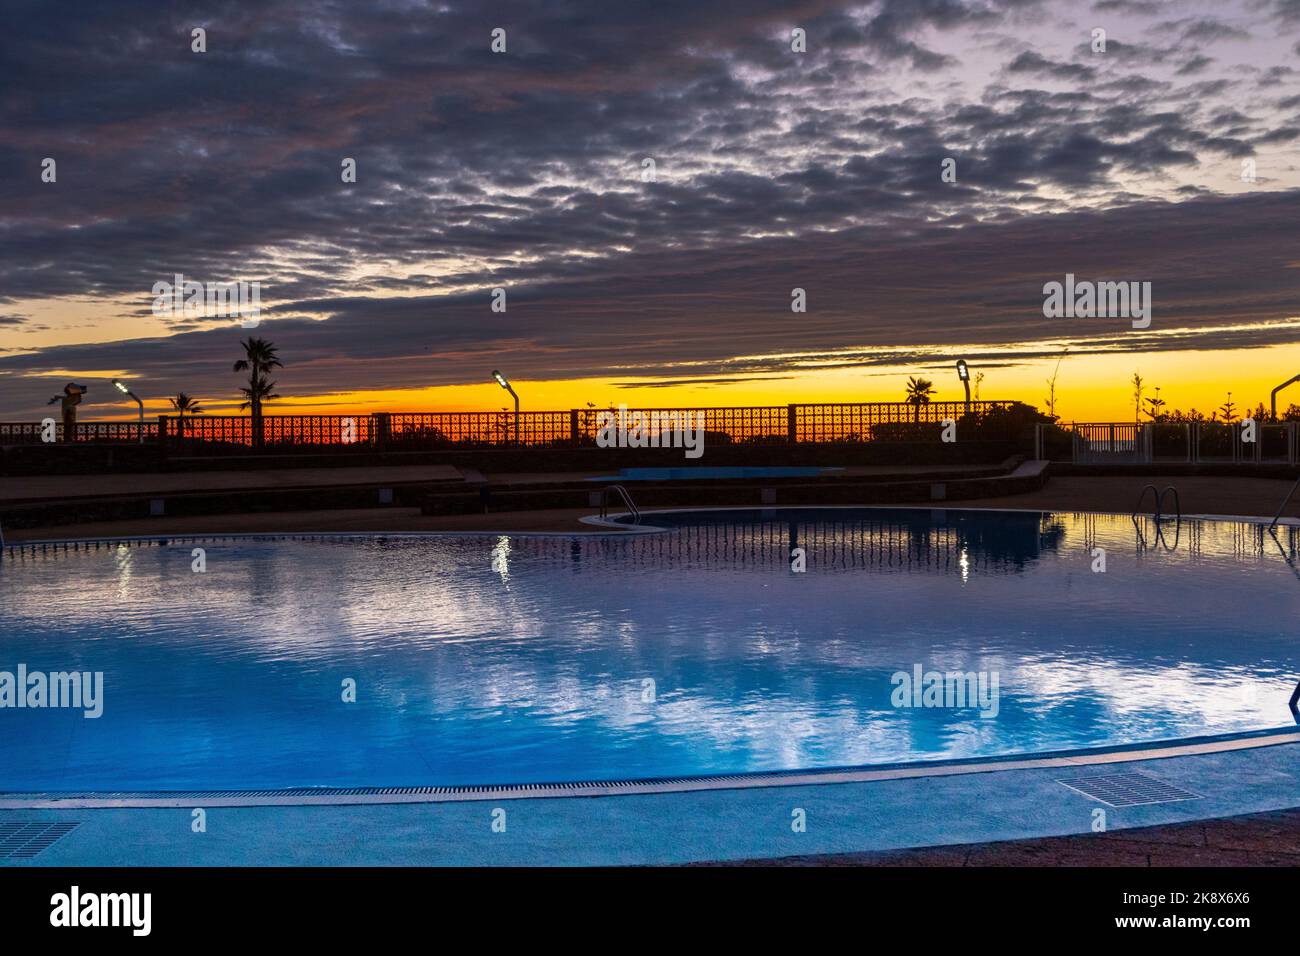 A cloudy sunrise over a swimming pool in Le Barcares, South of France. Stock Photo